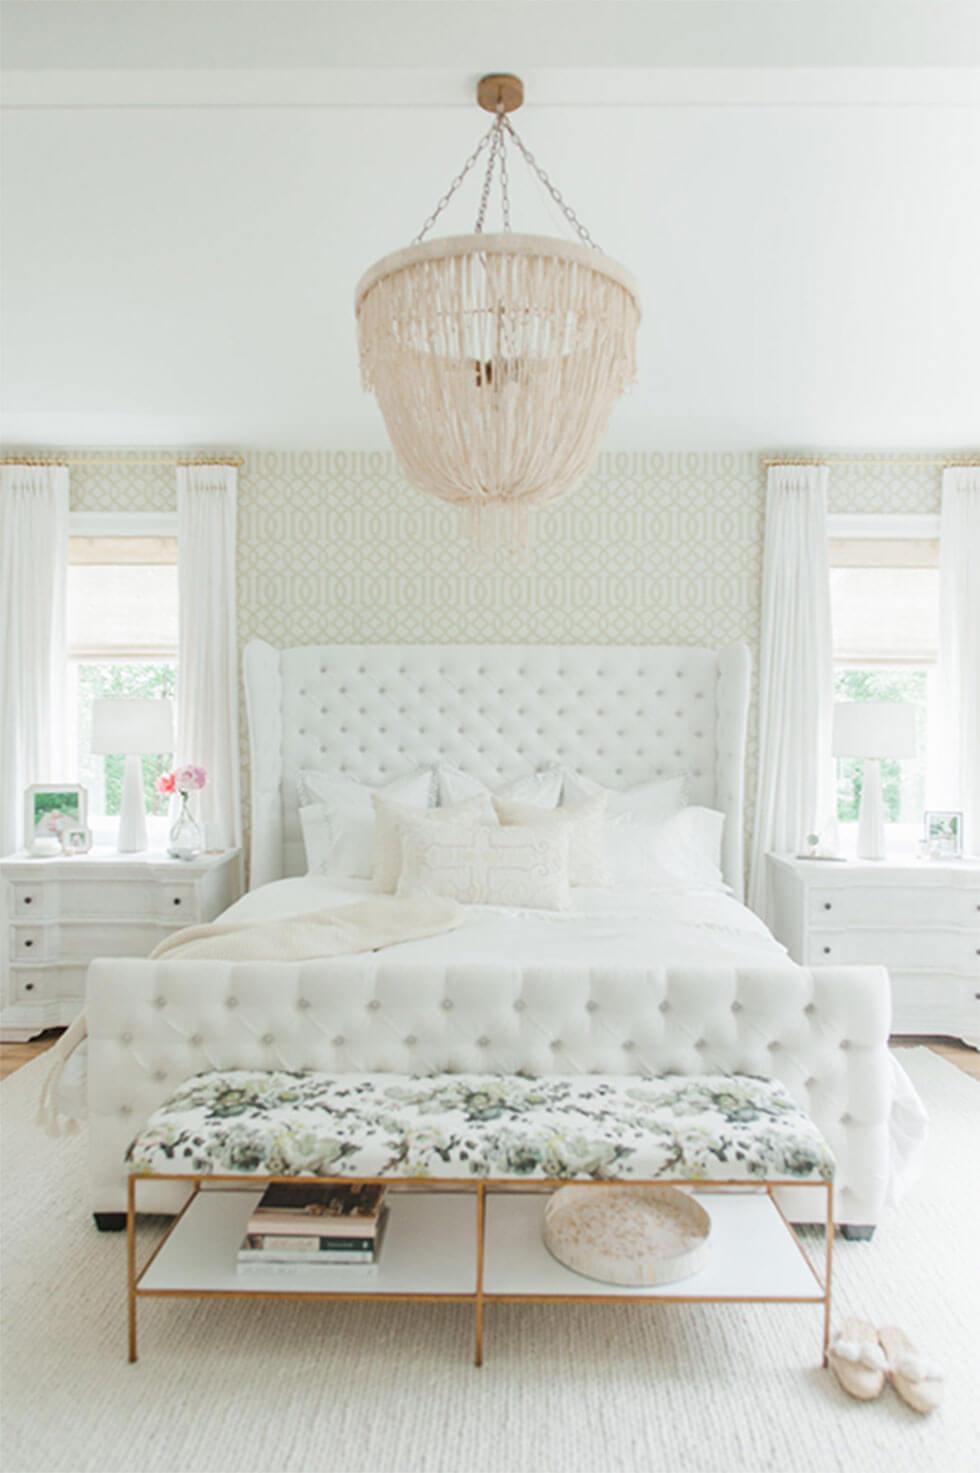 Ivory Cream and Beige Master Bedroom Colors - Transitional - Bedroom